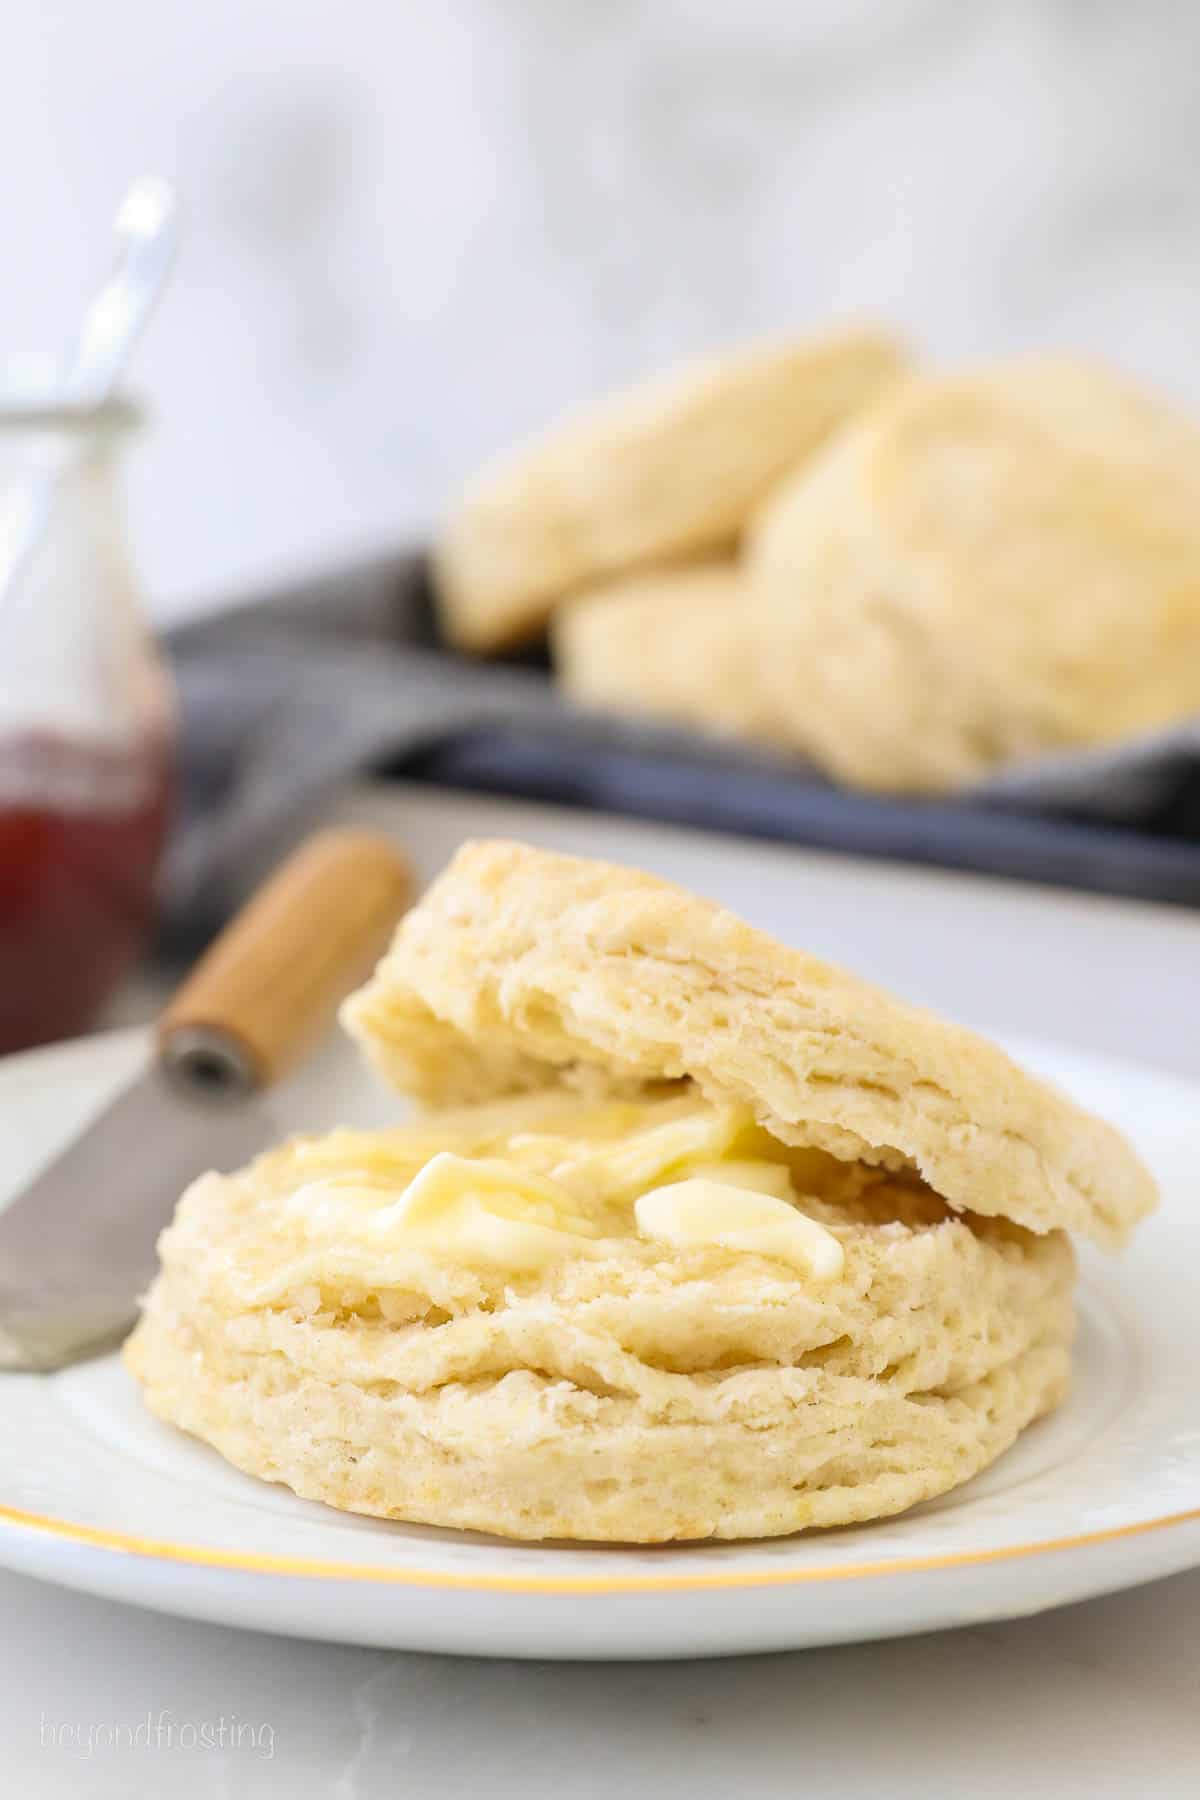 A biscuit cut in half with melted butter